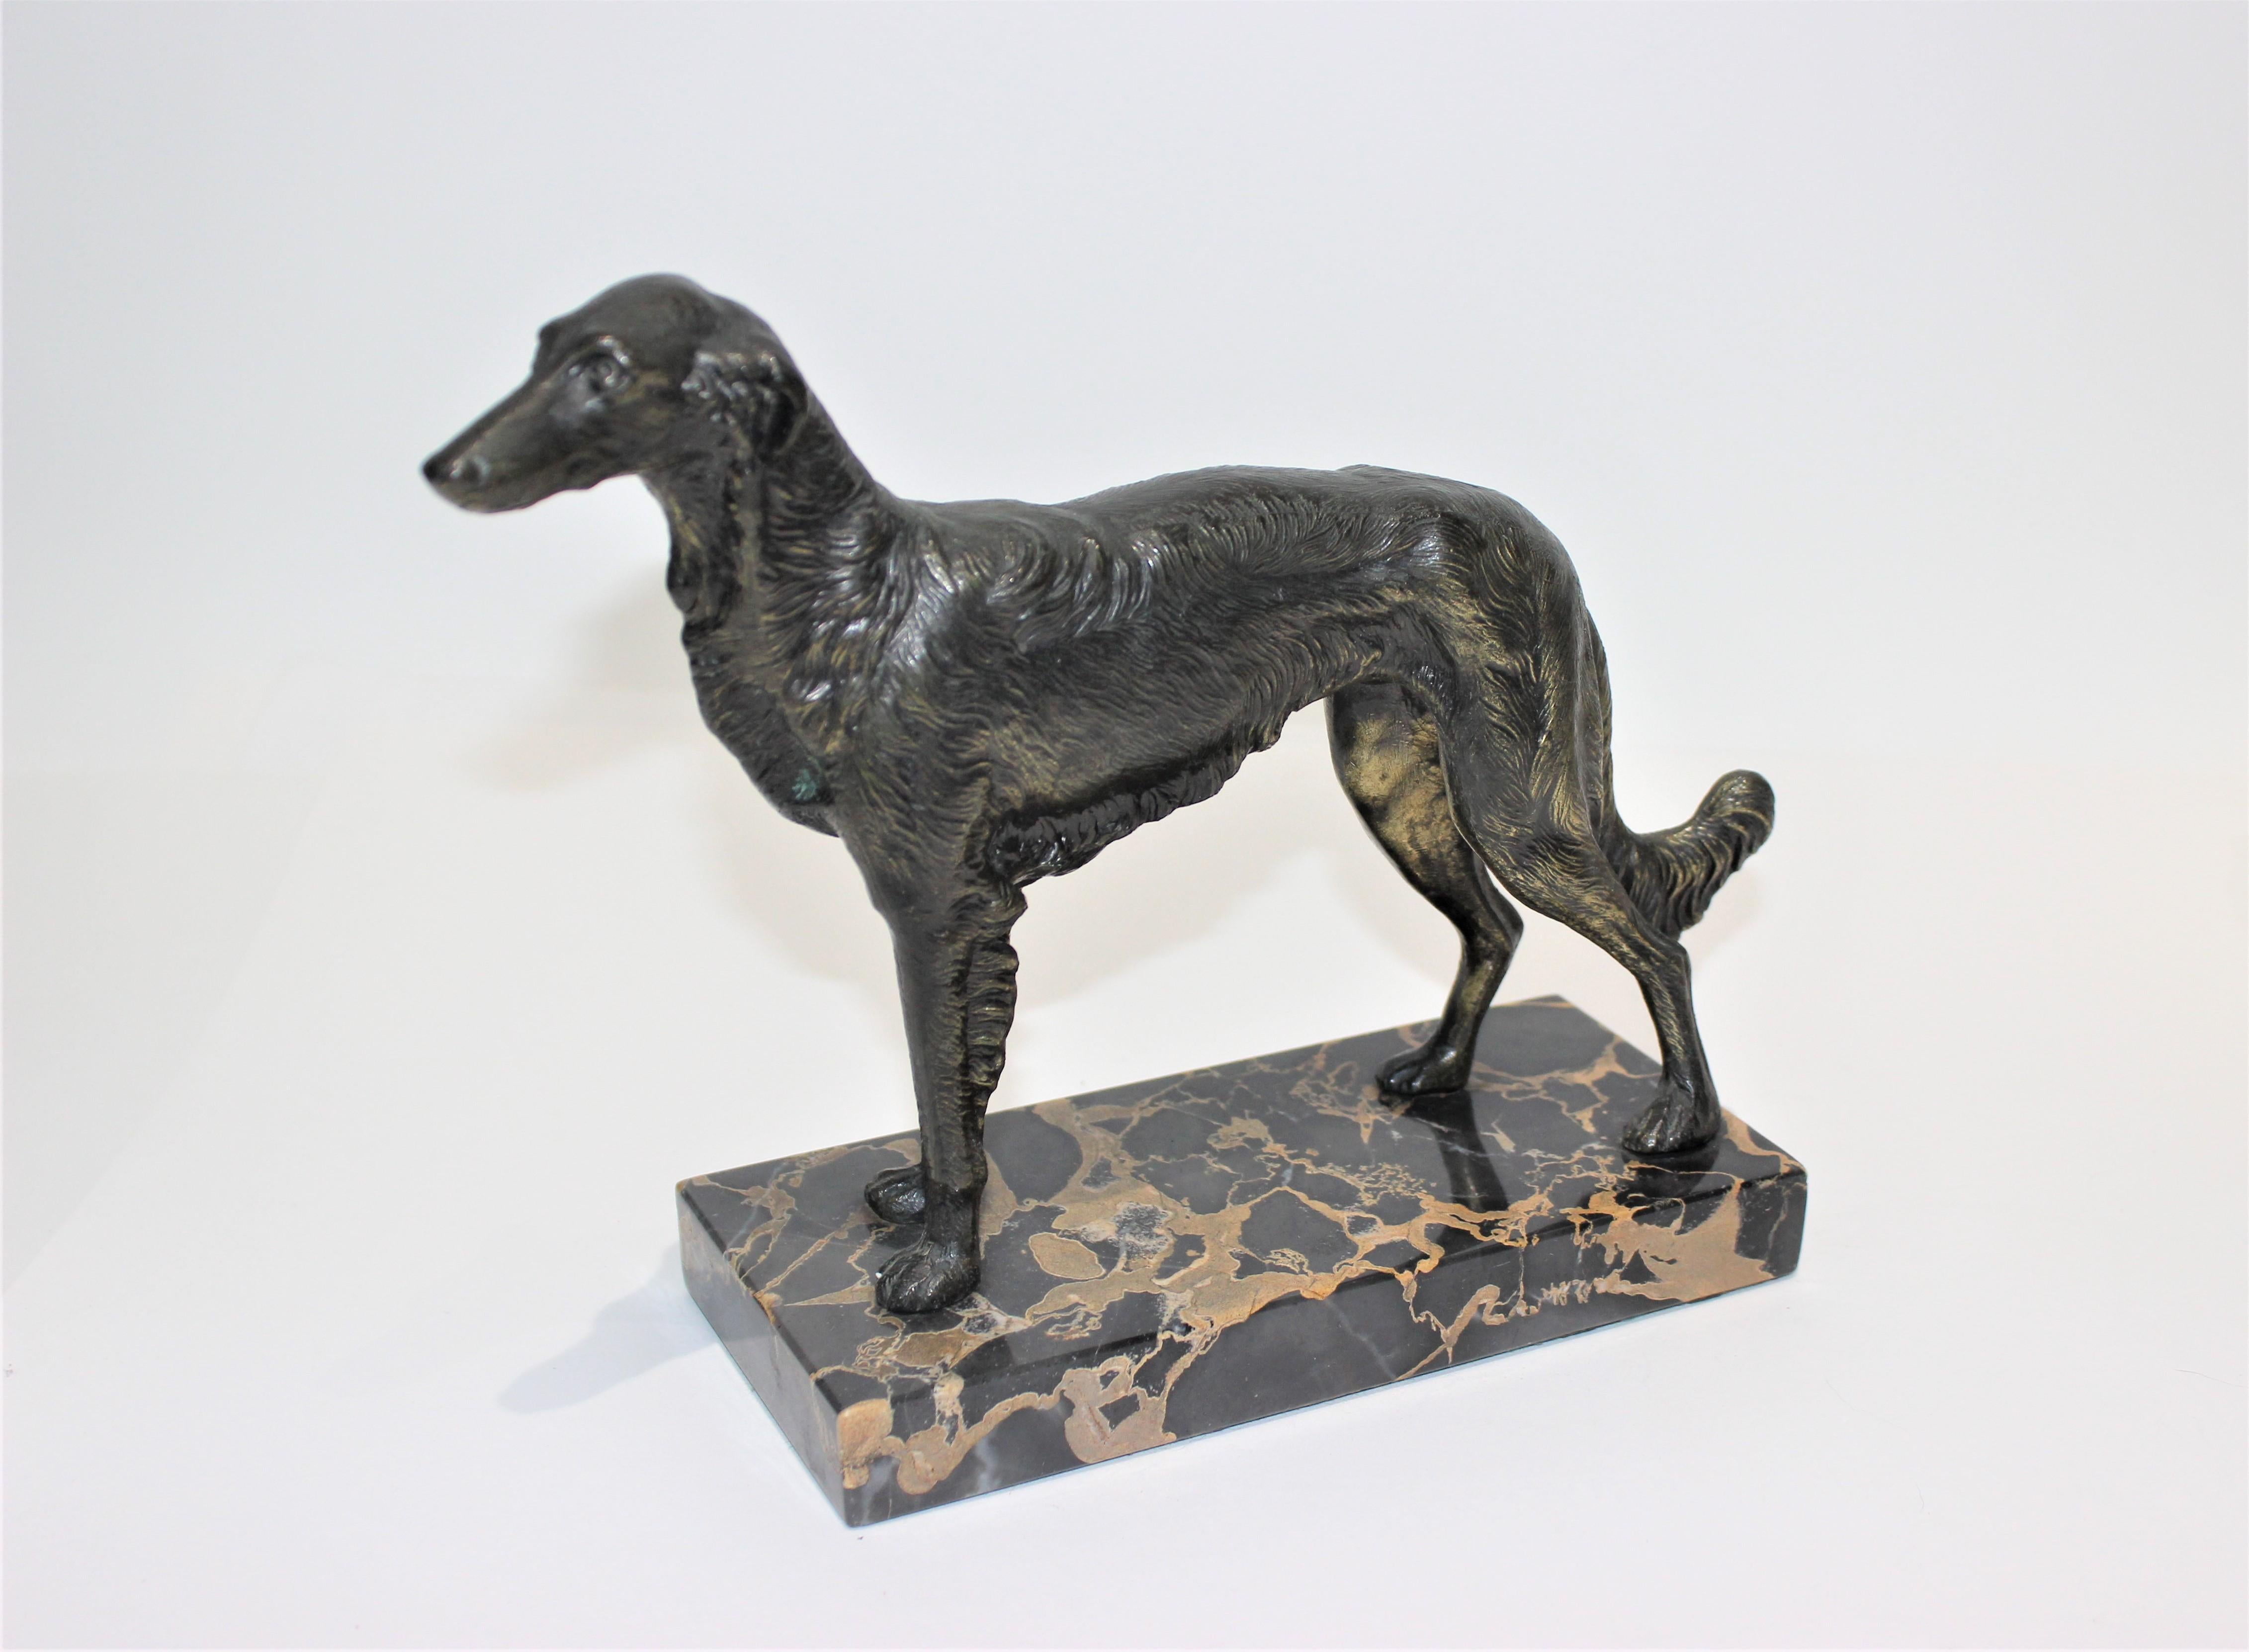 Borzoi 1920s sculpture bronze patina on marble Russian Wolfhound from a Palm Beach estate. 

Iconic early Art Deco motif 1920s elegant waist high dog, a favorite of glam Hollywood fashionistas and Europe's celebrities

Overall size is 9.75 W x